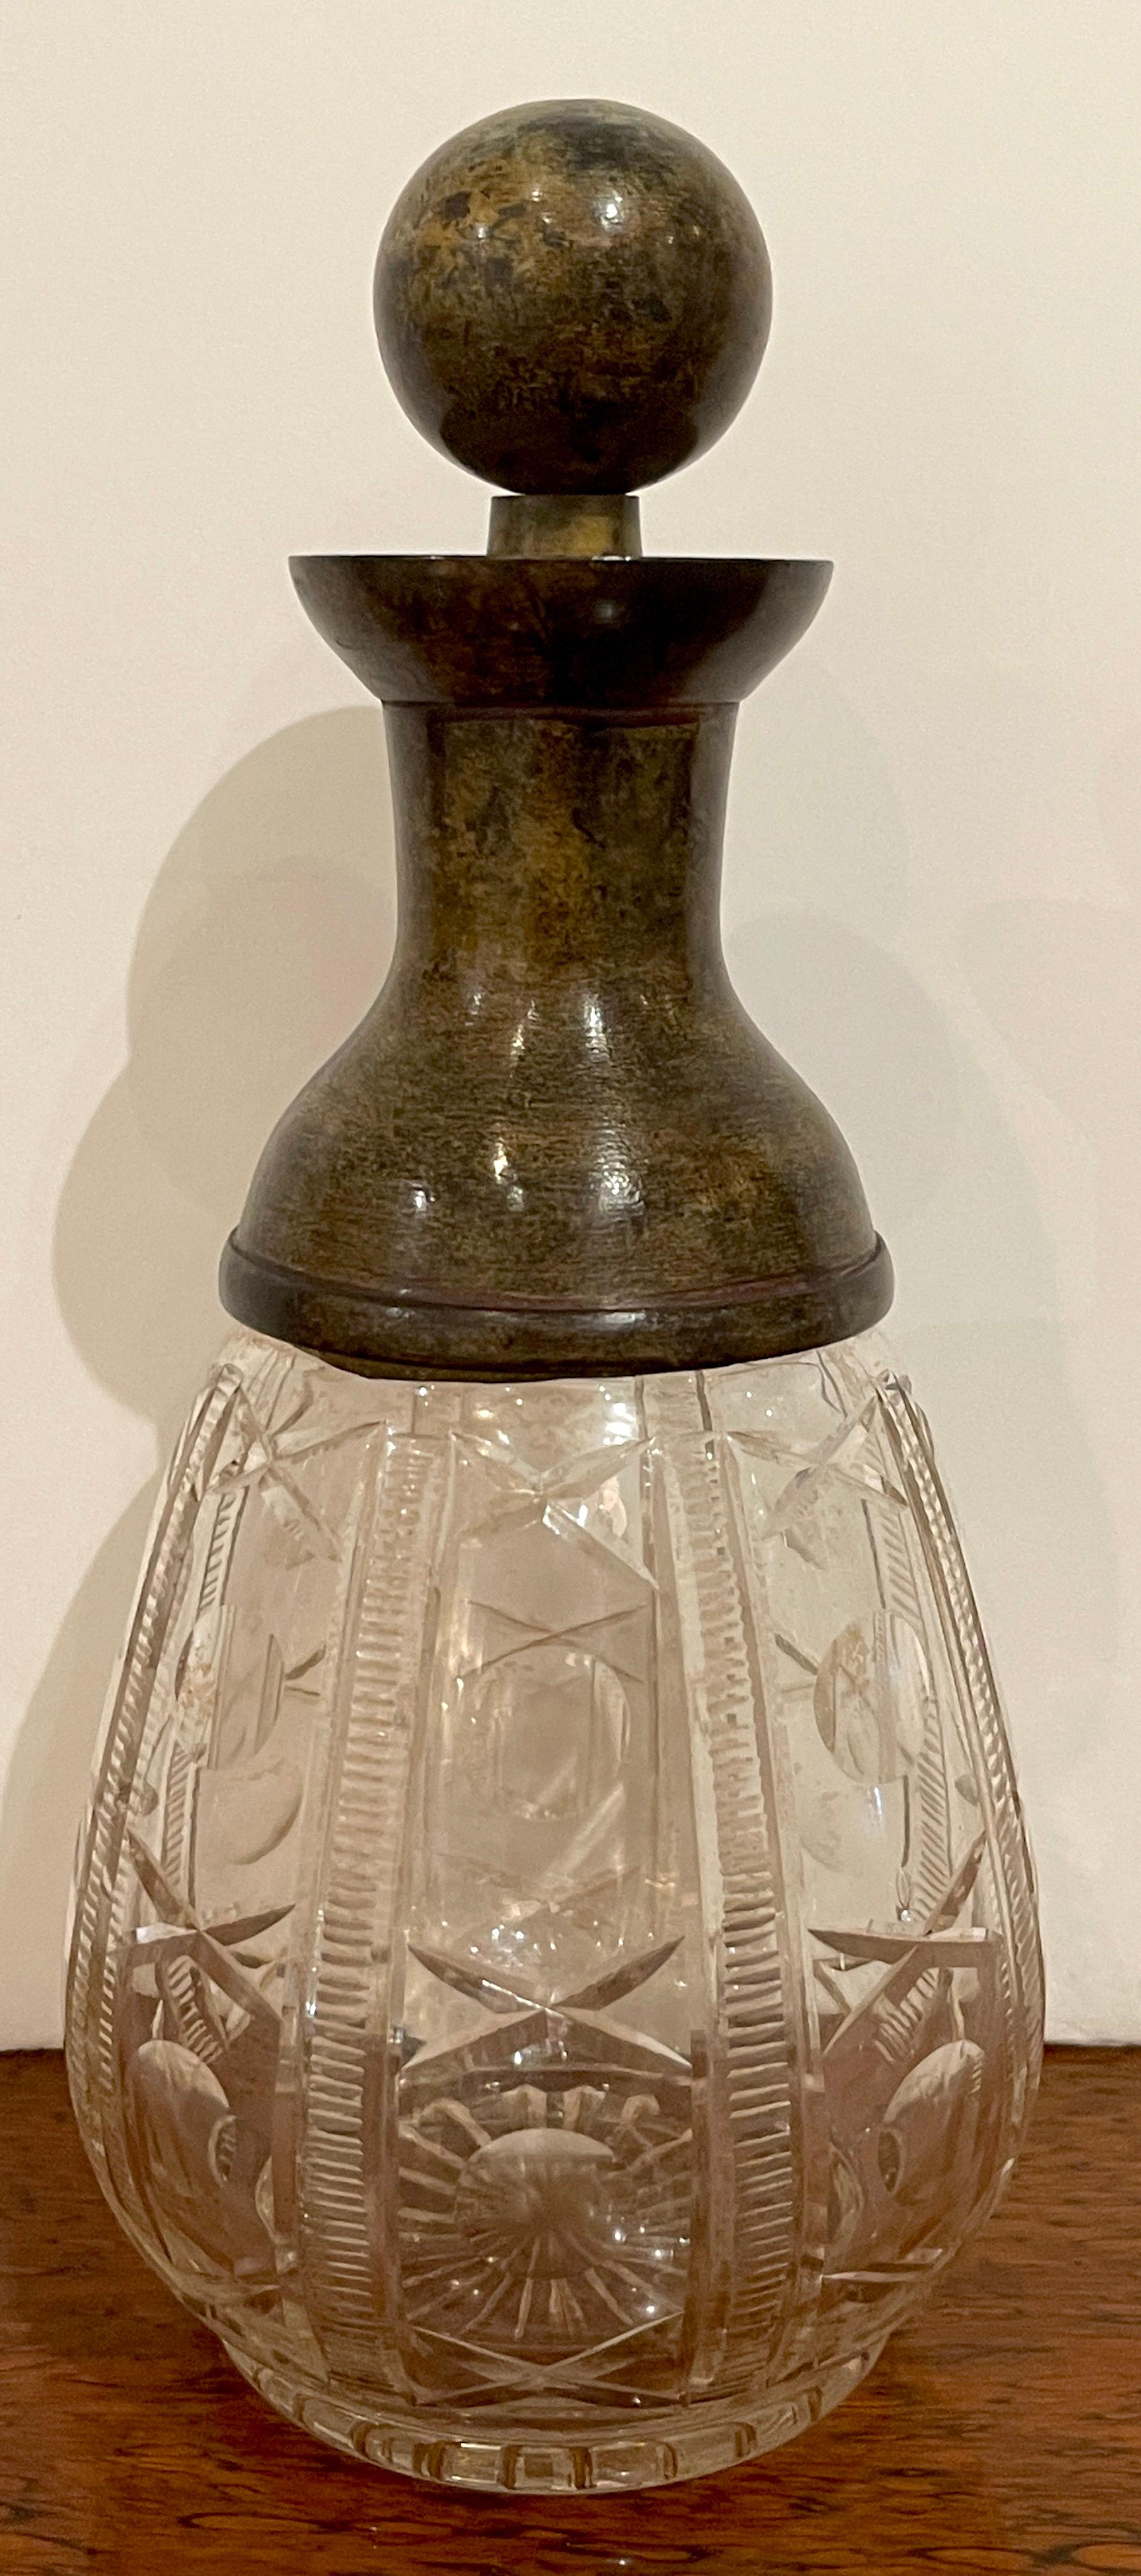 French Modern 'X&O' cut glass & patinated bronze decanter, smaller
With a high caliber (heavy) cast bronze orb stopper, resting on a bronze elongated conforming bronze collar the lower part with rows of cut glass 'X & 0' s
This decanter stands